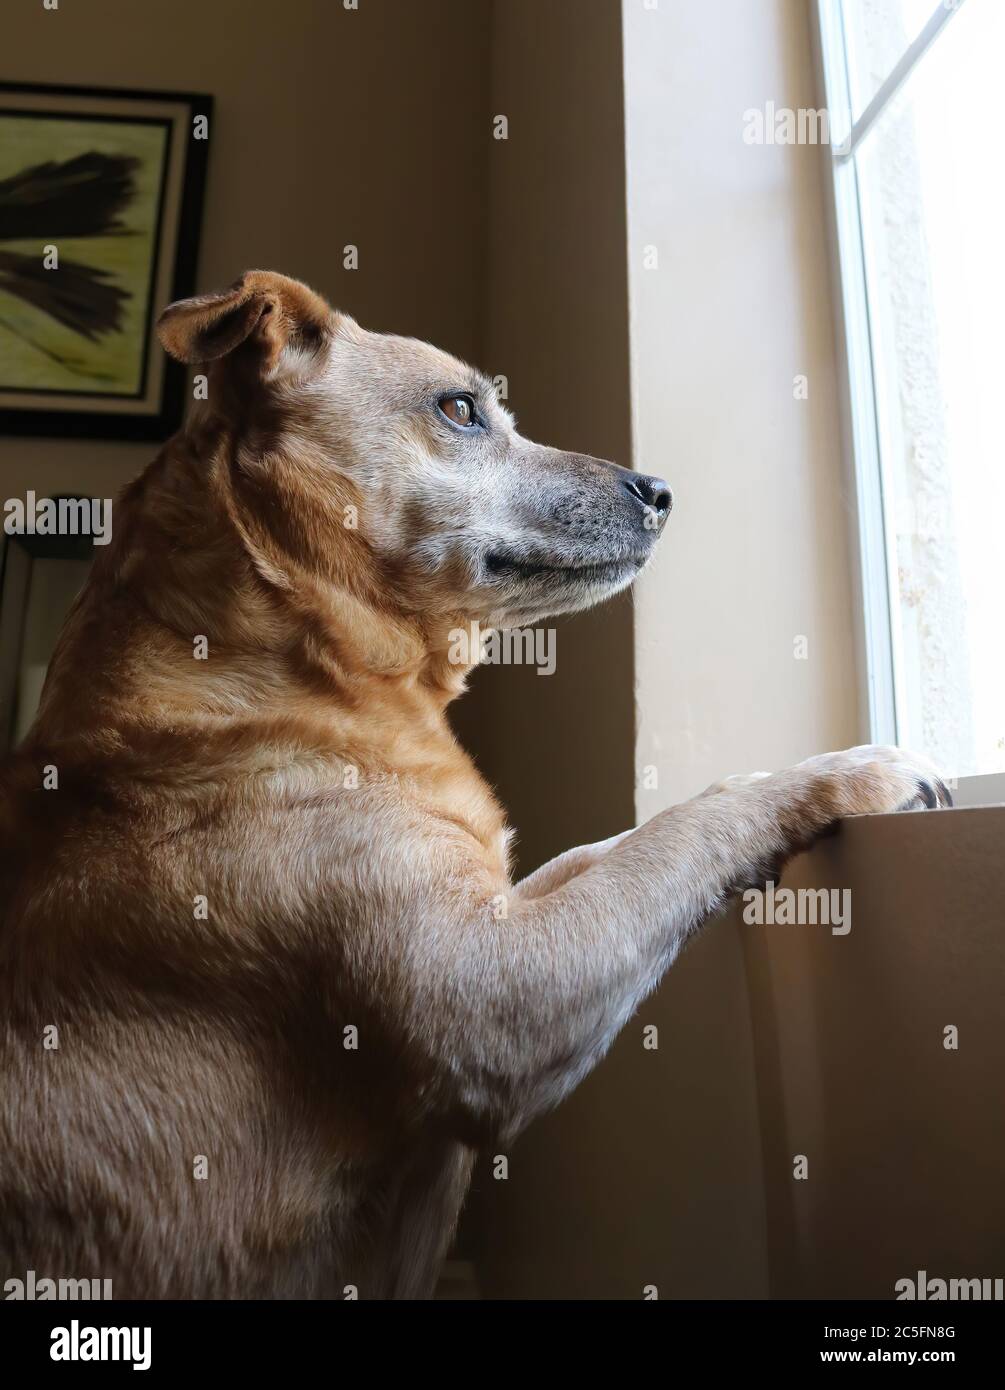 Dog on hind legs looks out front window with light shining on furry face and eyes and cinnamon colored fur. Stock Photo